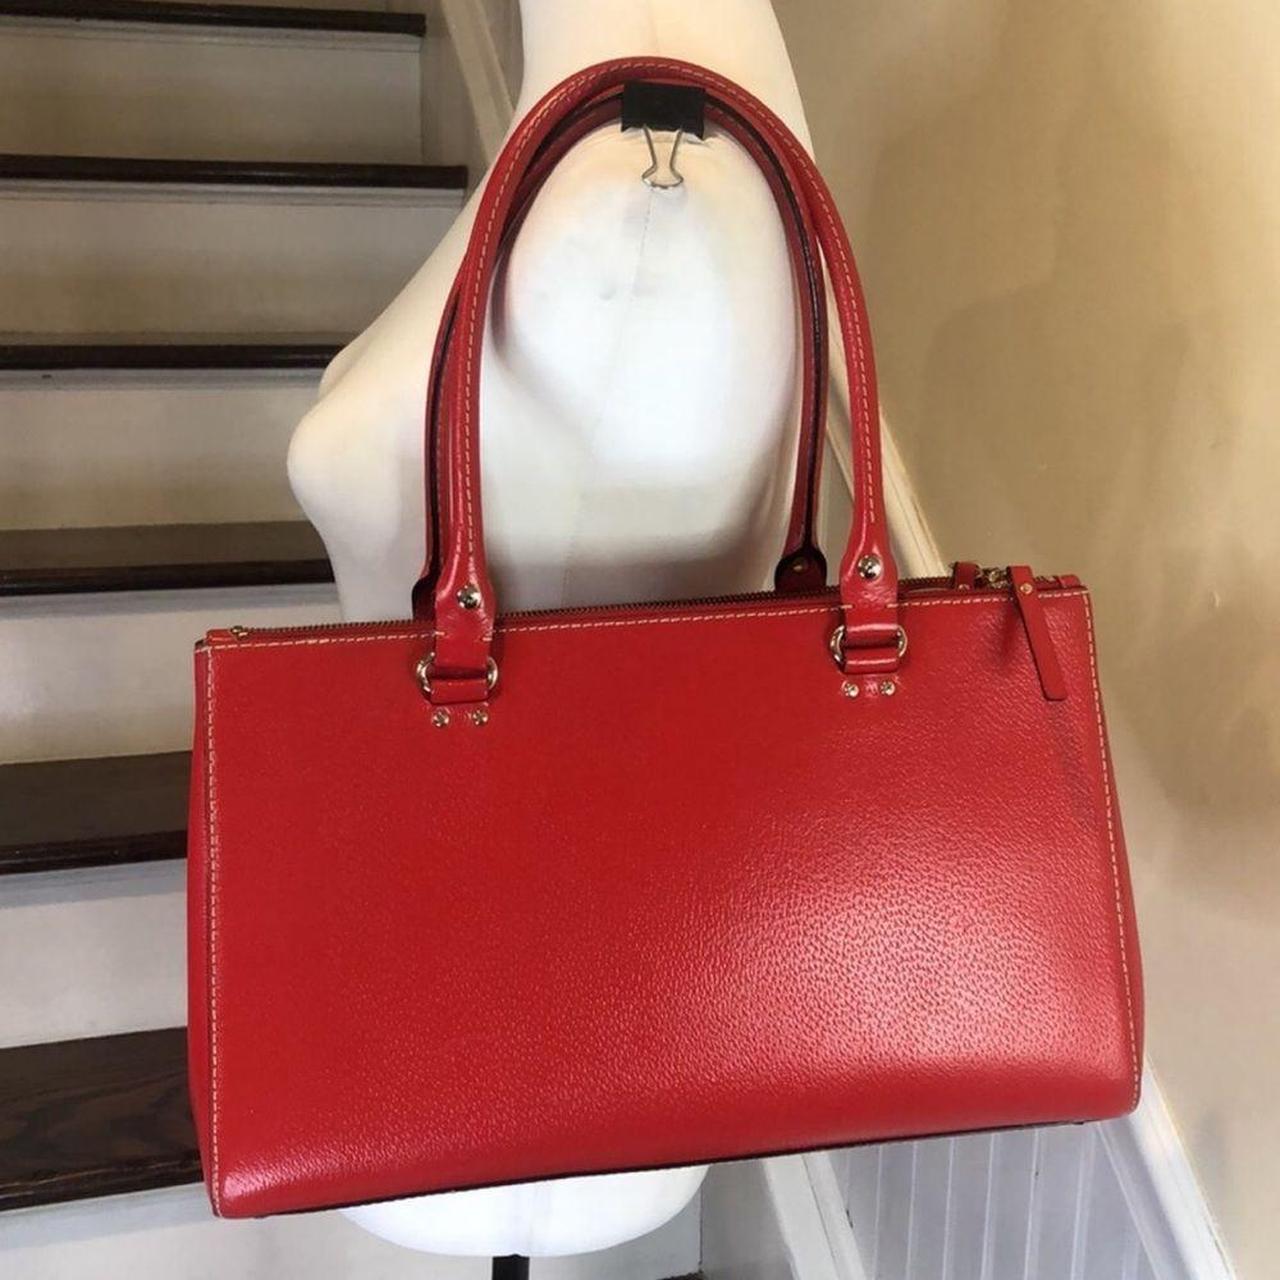 Ready Stock MY KATE SPADE KITT NYLON LARGE TOTE IN RED SANGRIA (KC455)  RM499 Measure Approx. 5.59” W x 4.25” H x 17.32” D 11”H x 12”w… | Instagram